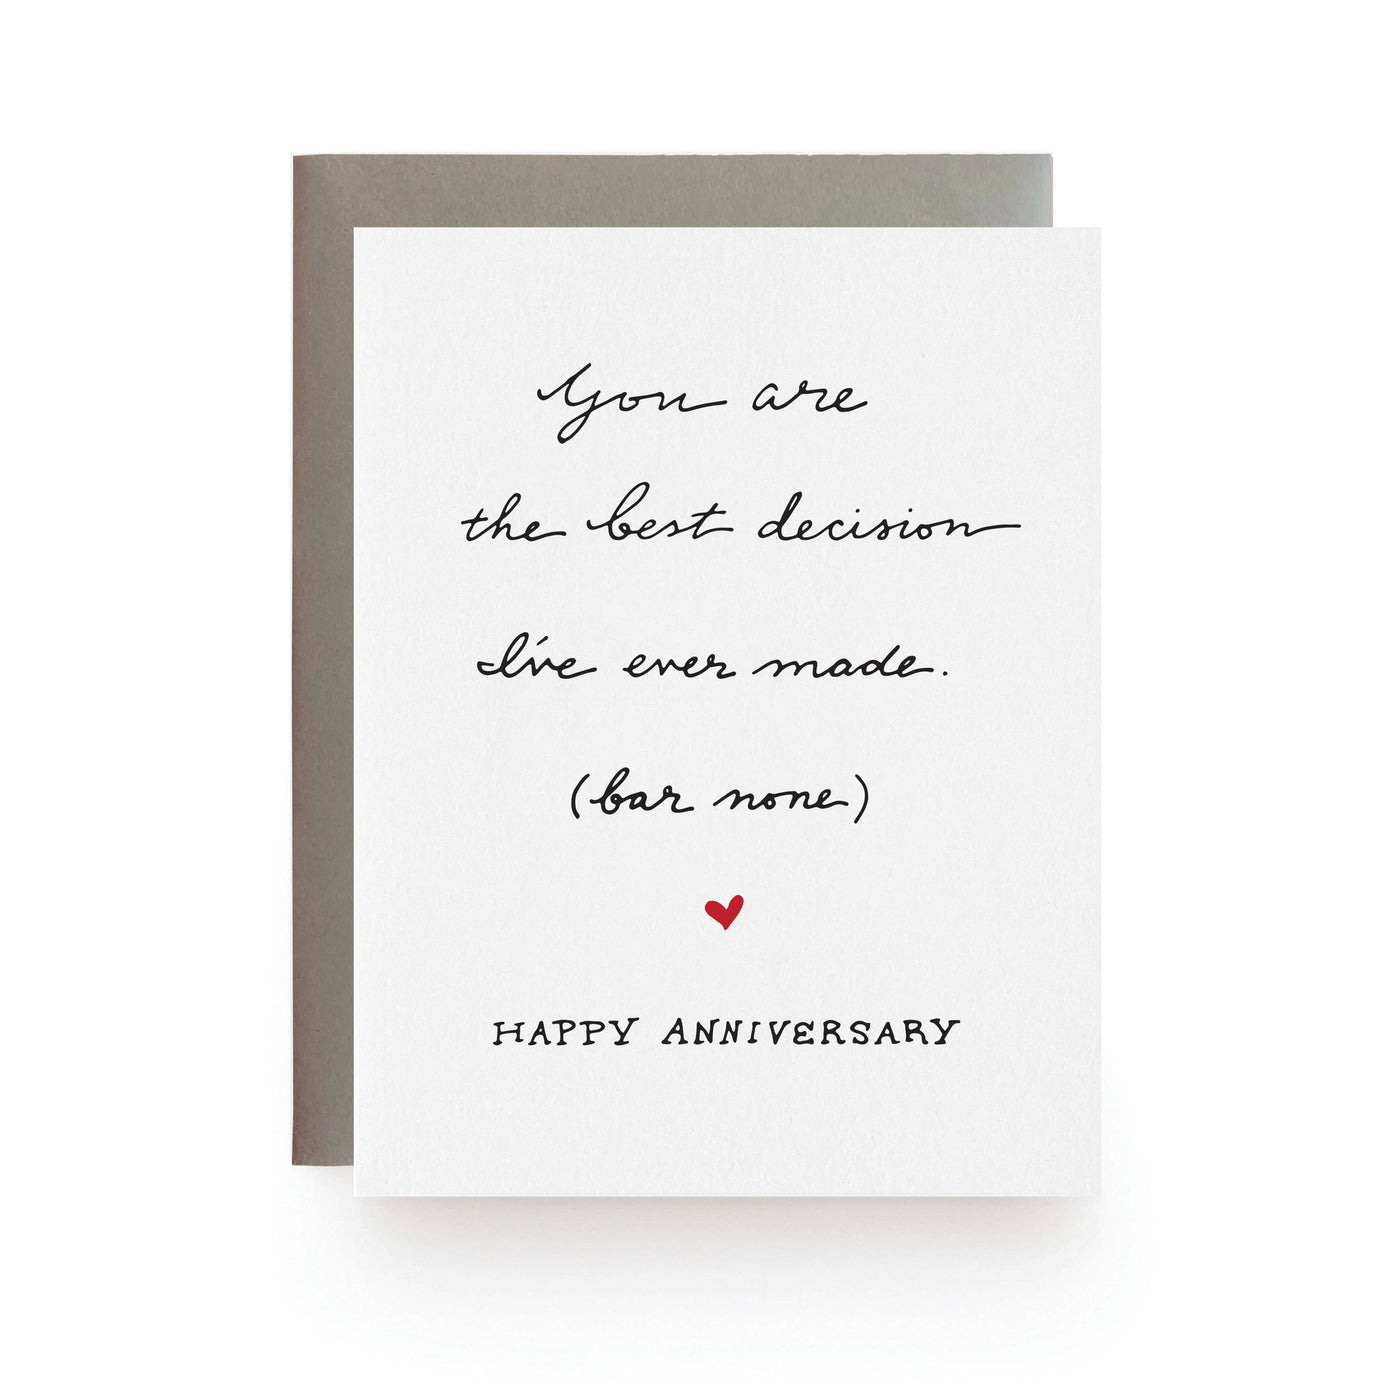 Best Decision | Anniversary Card